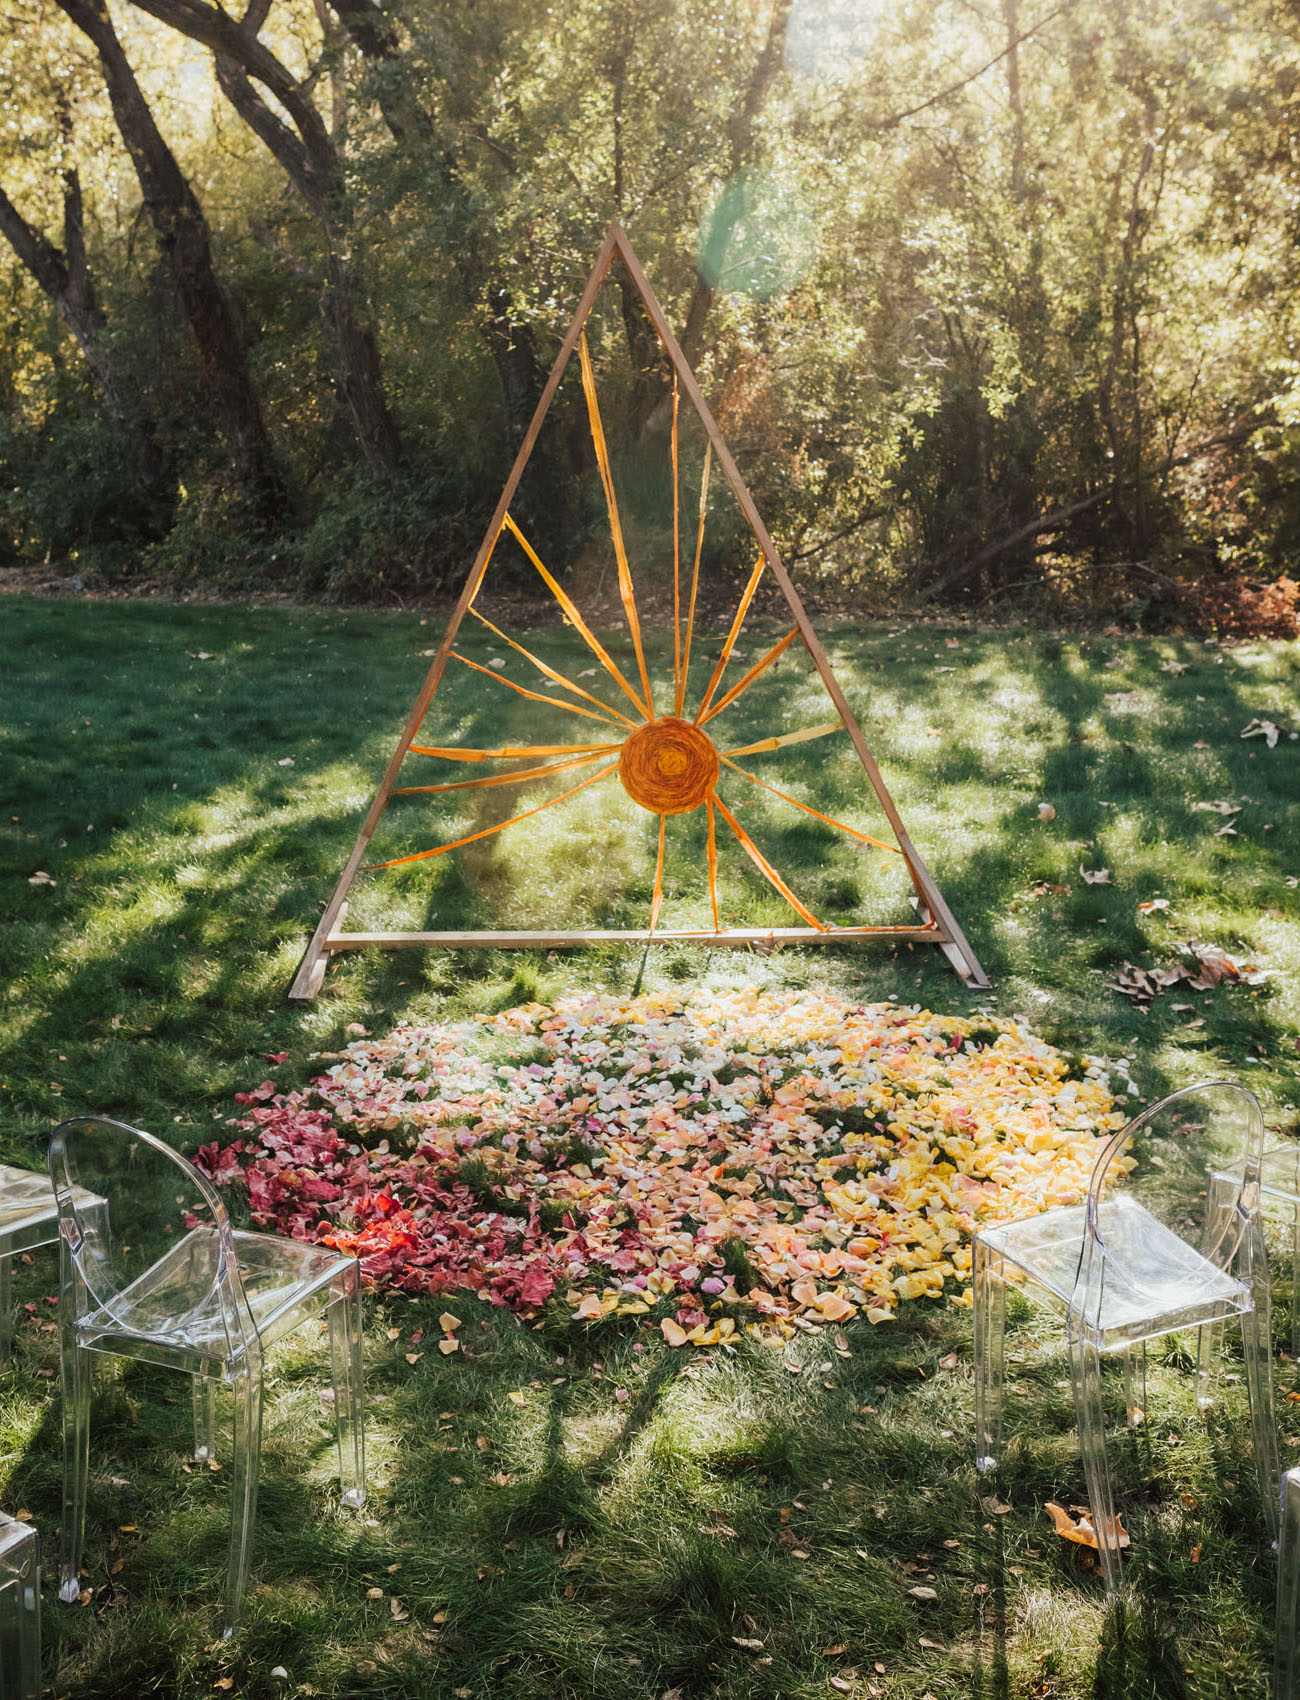 The wedding altar was inspired by the sun and was done with hand dyed cloth